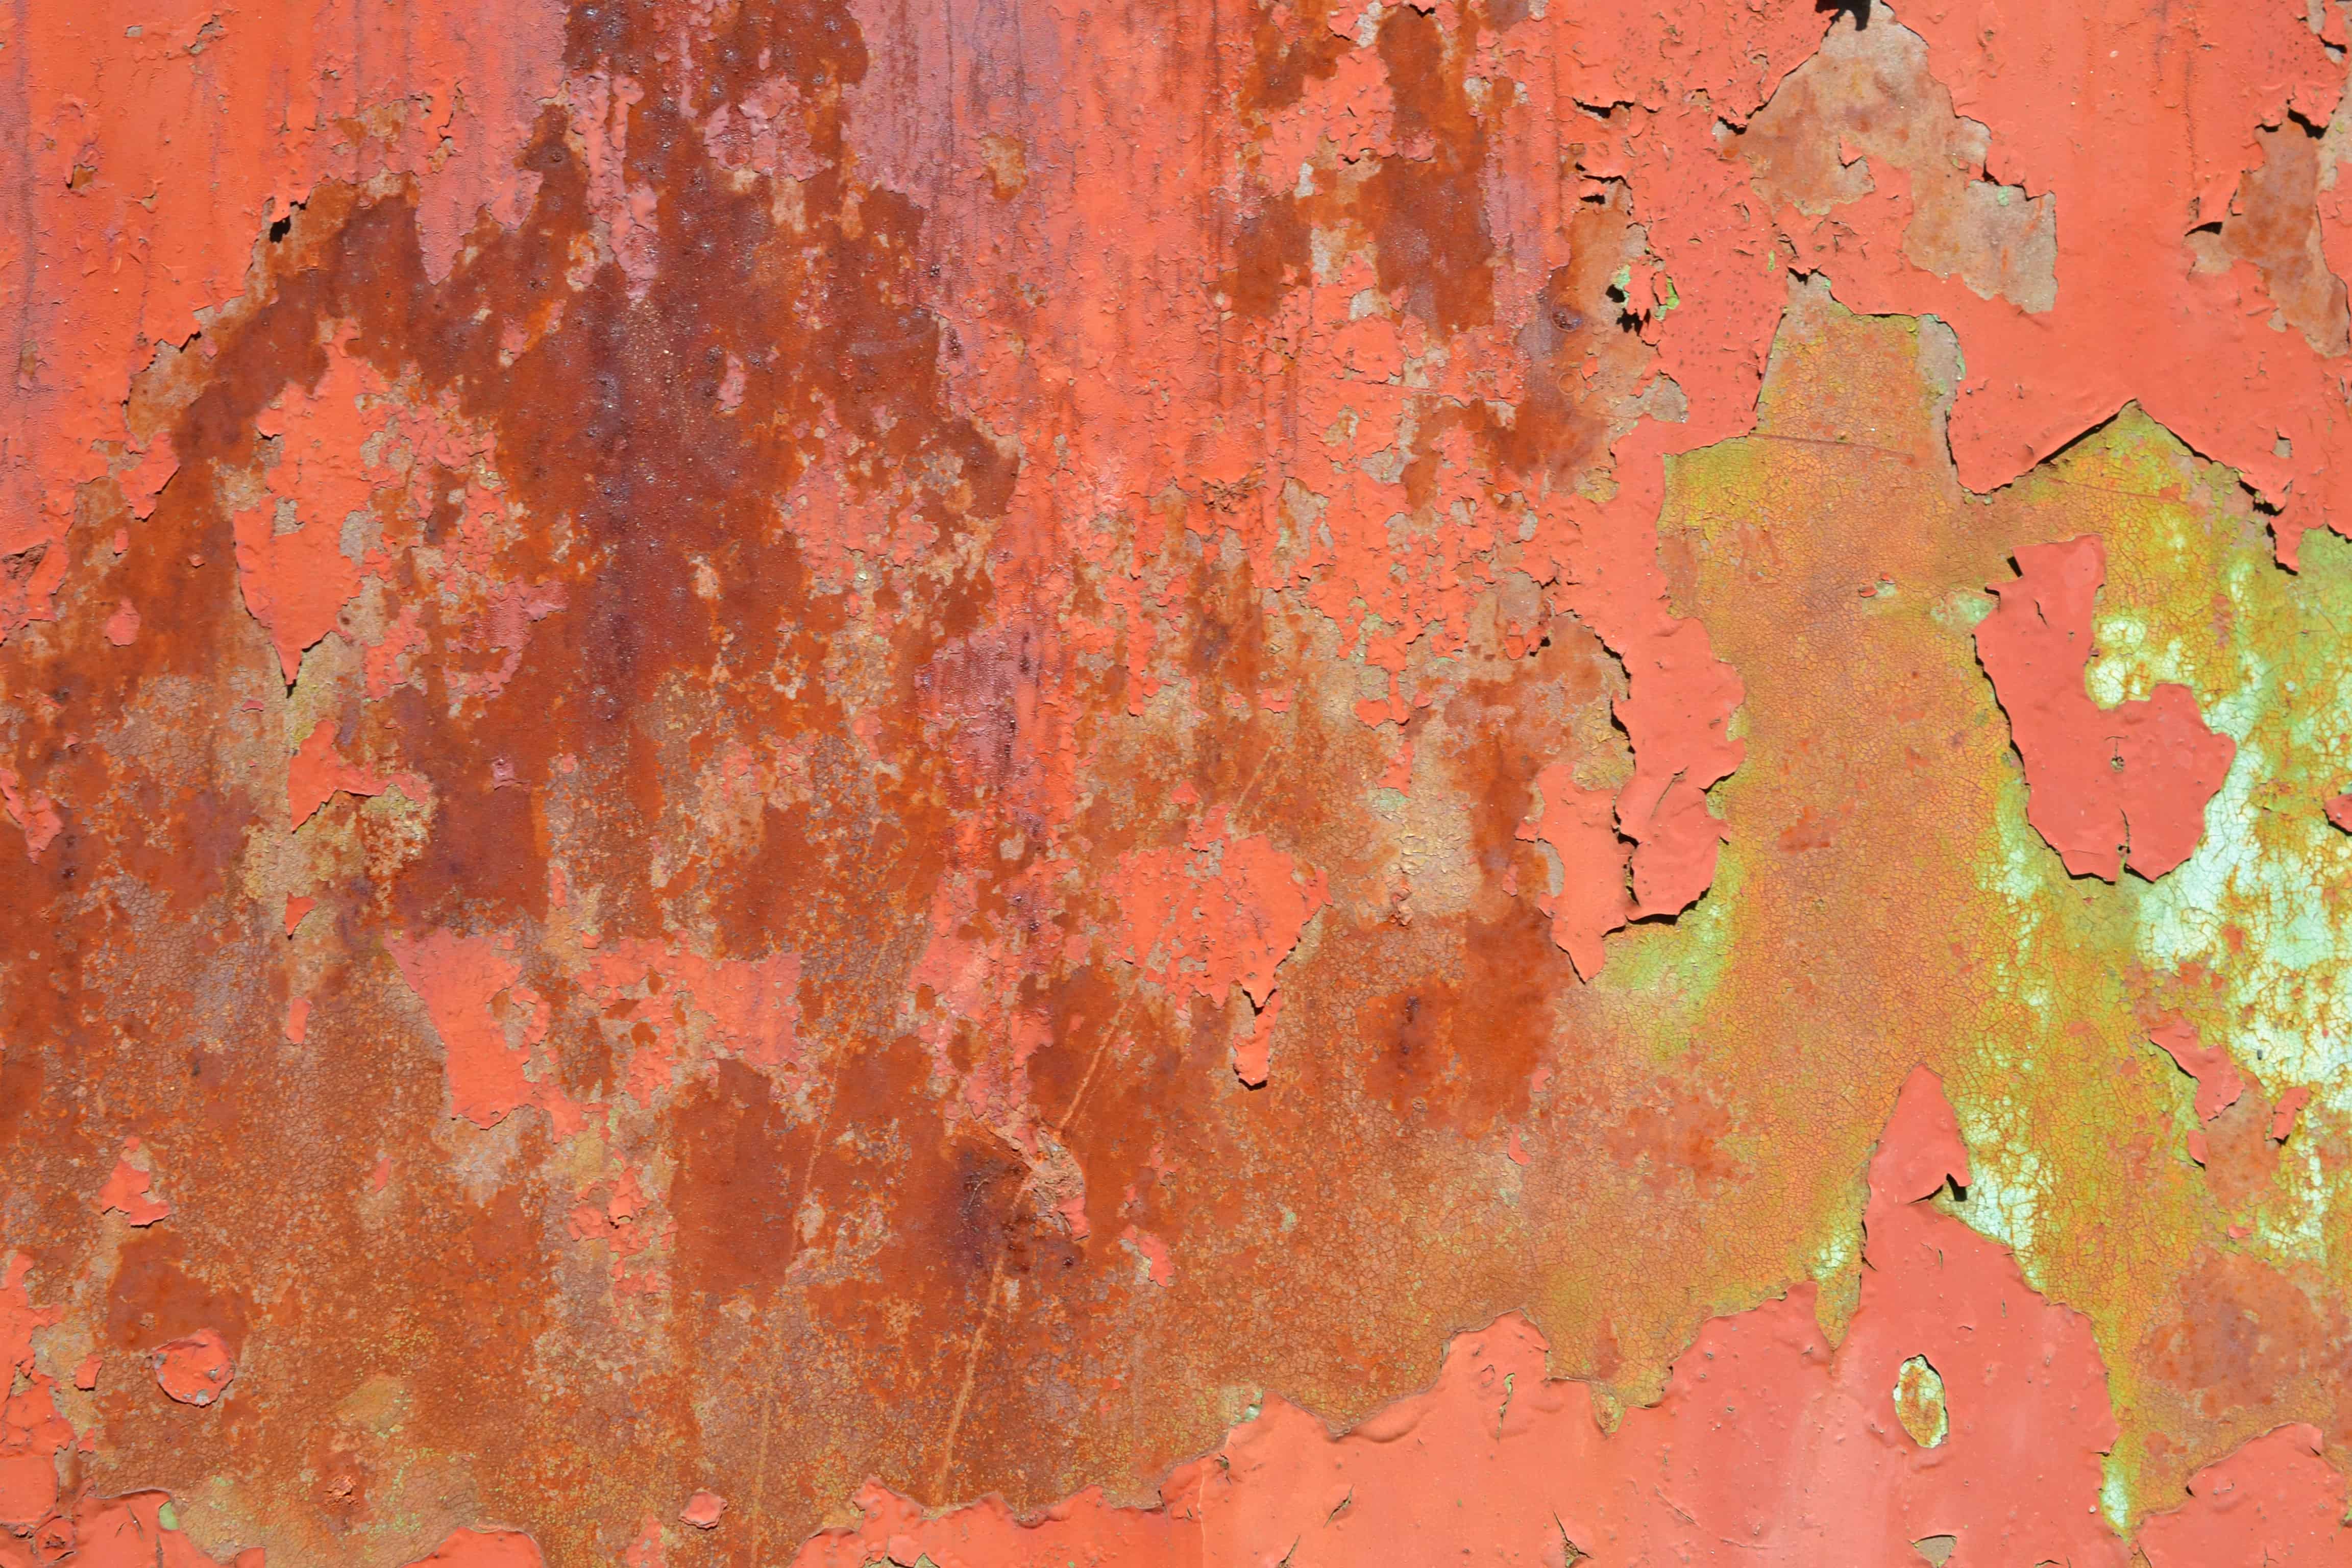 Free picture: paint, rust, abstract, texture, pattern, retro, wall ...